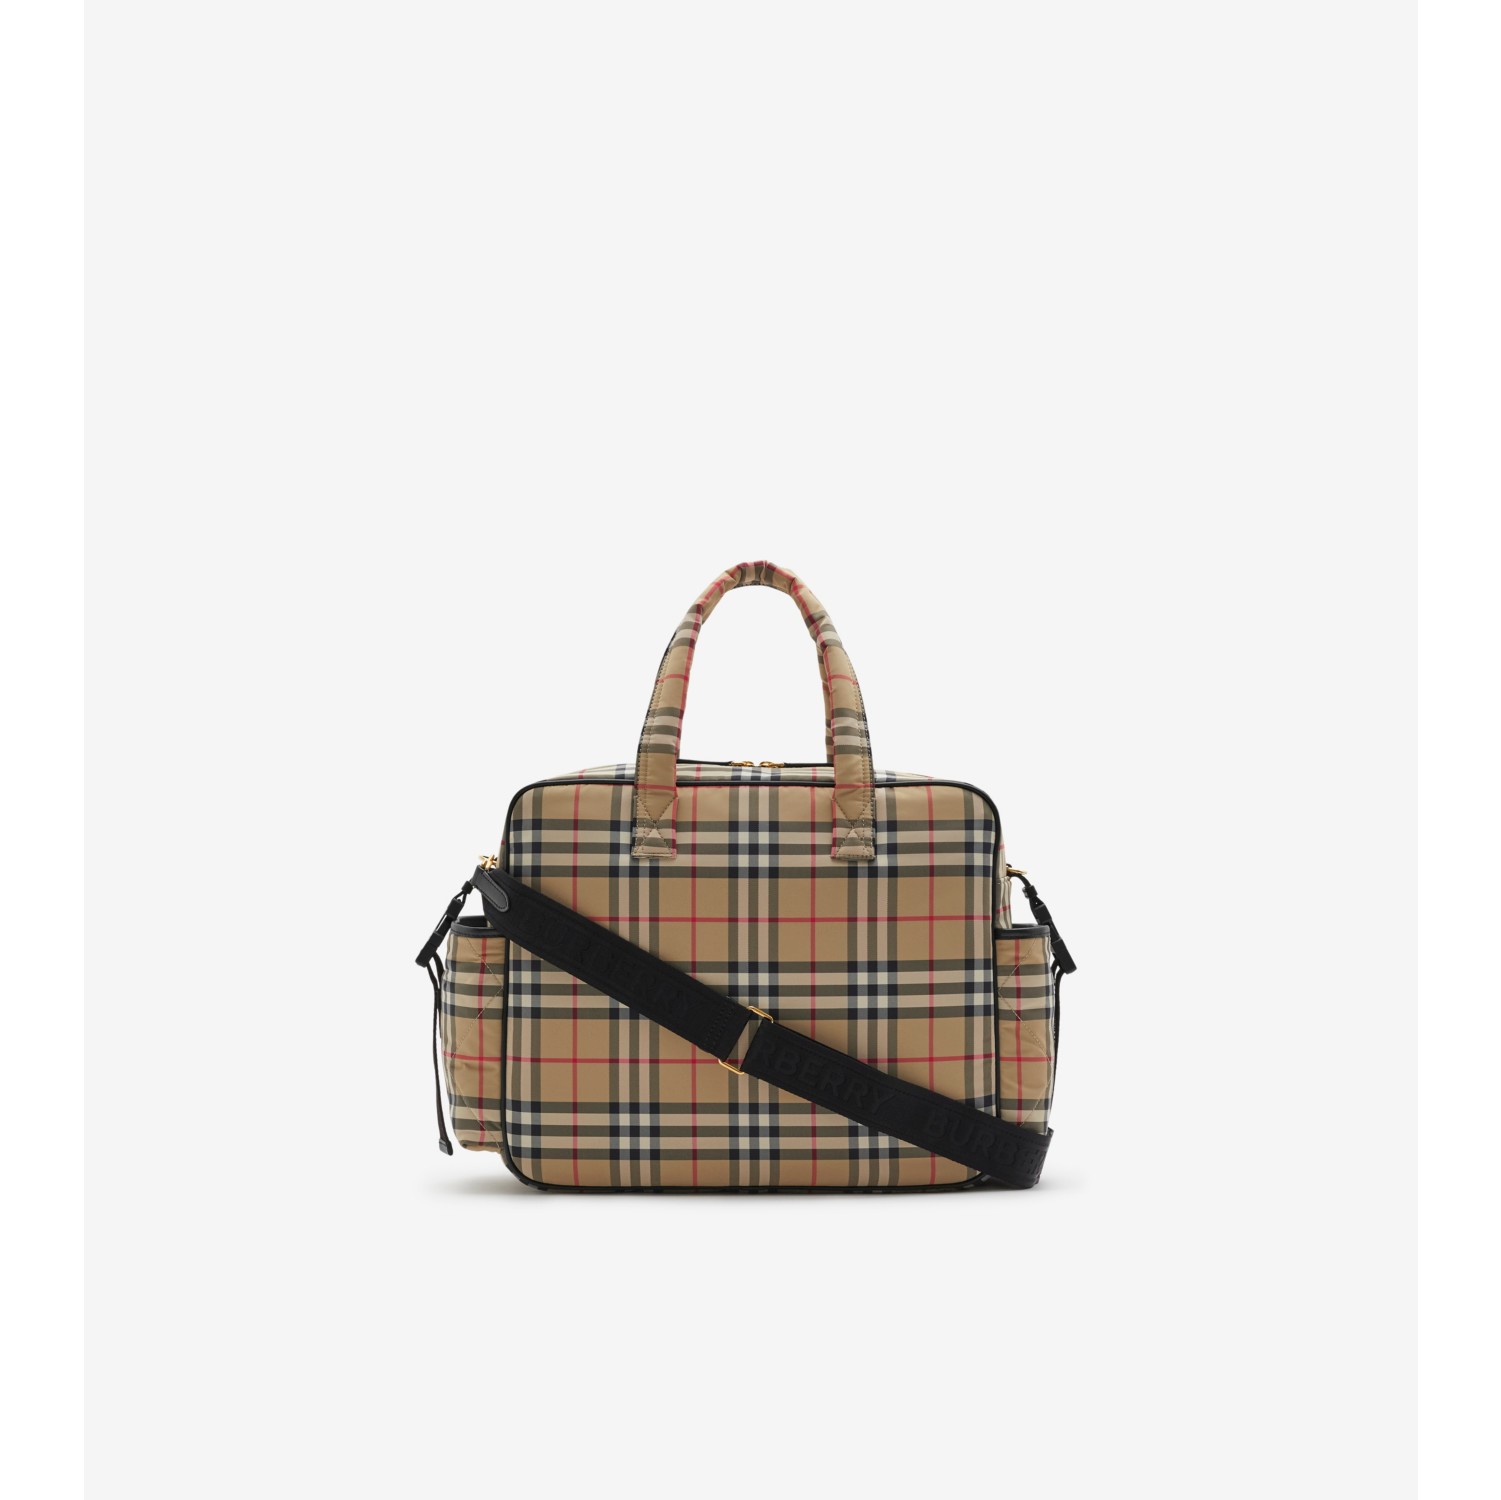 Burberry Luggage & Travel Bags